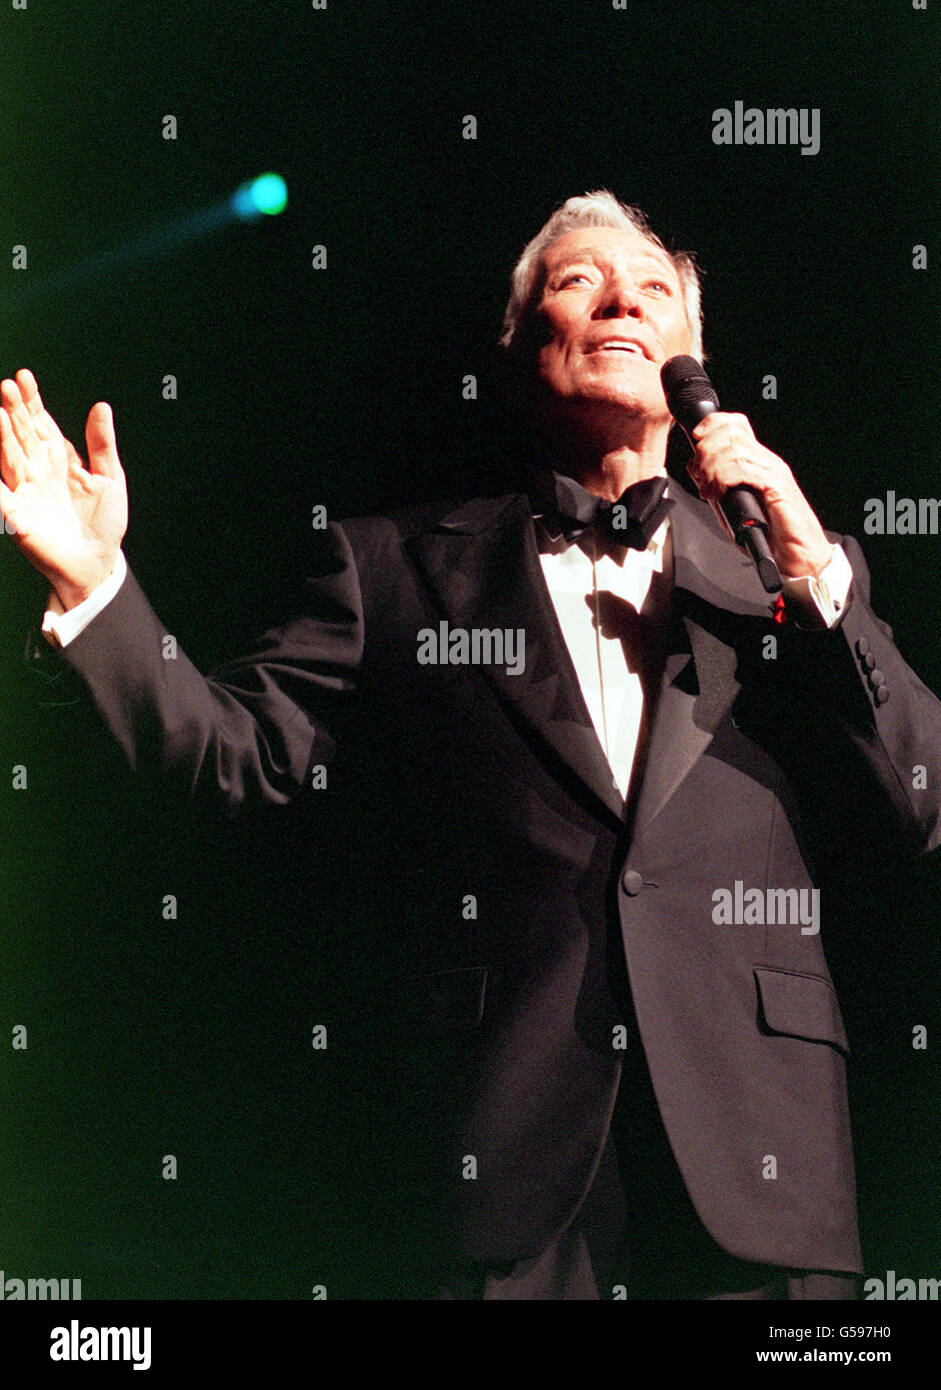 Andy Williams. American singer Andy Wiliams performs on stage in London ...